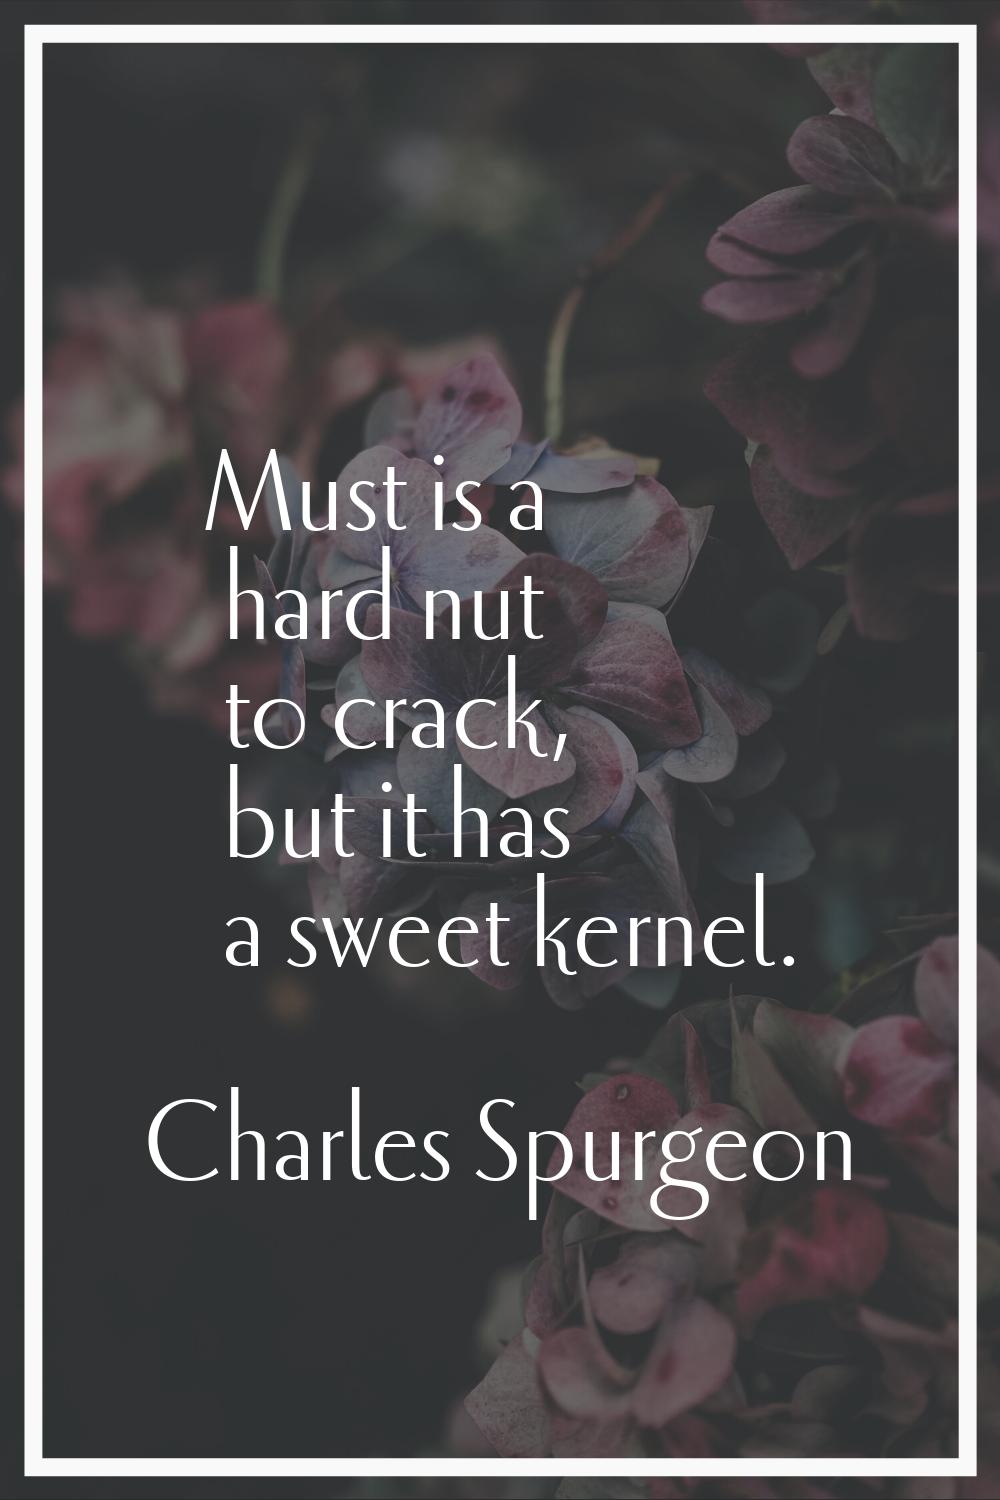 Must is a hard nut to crack, but it has a sweet kernel.